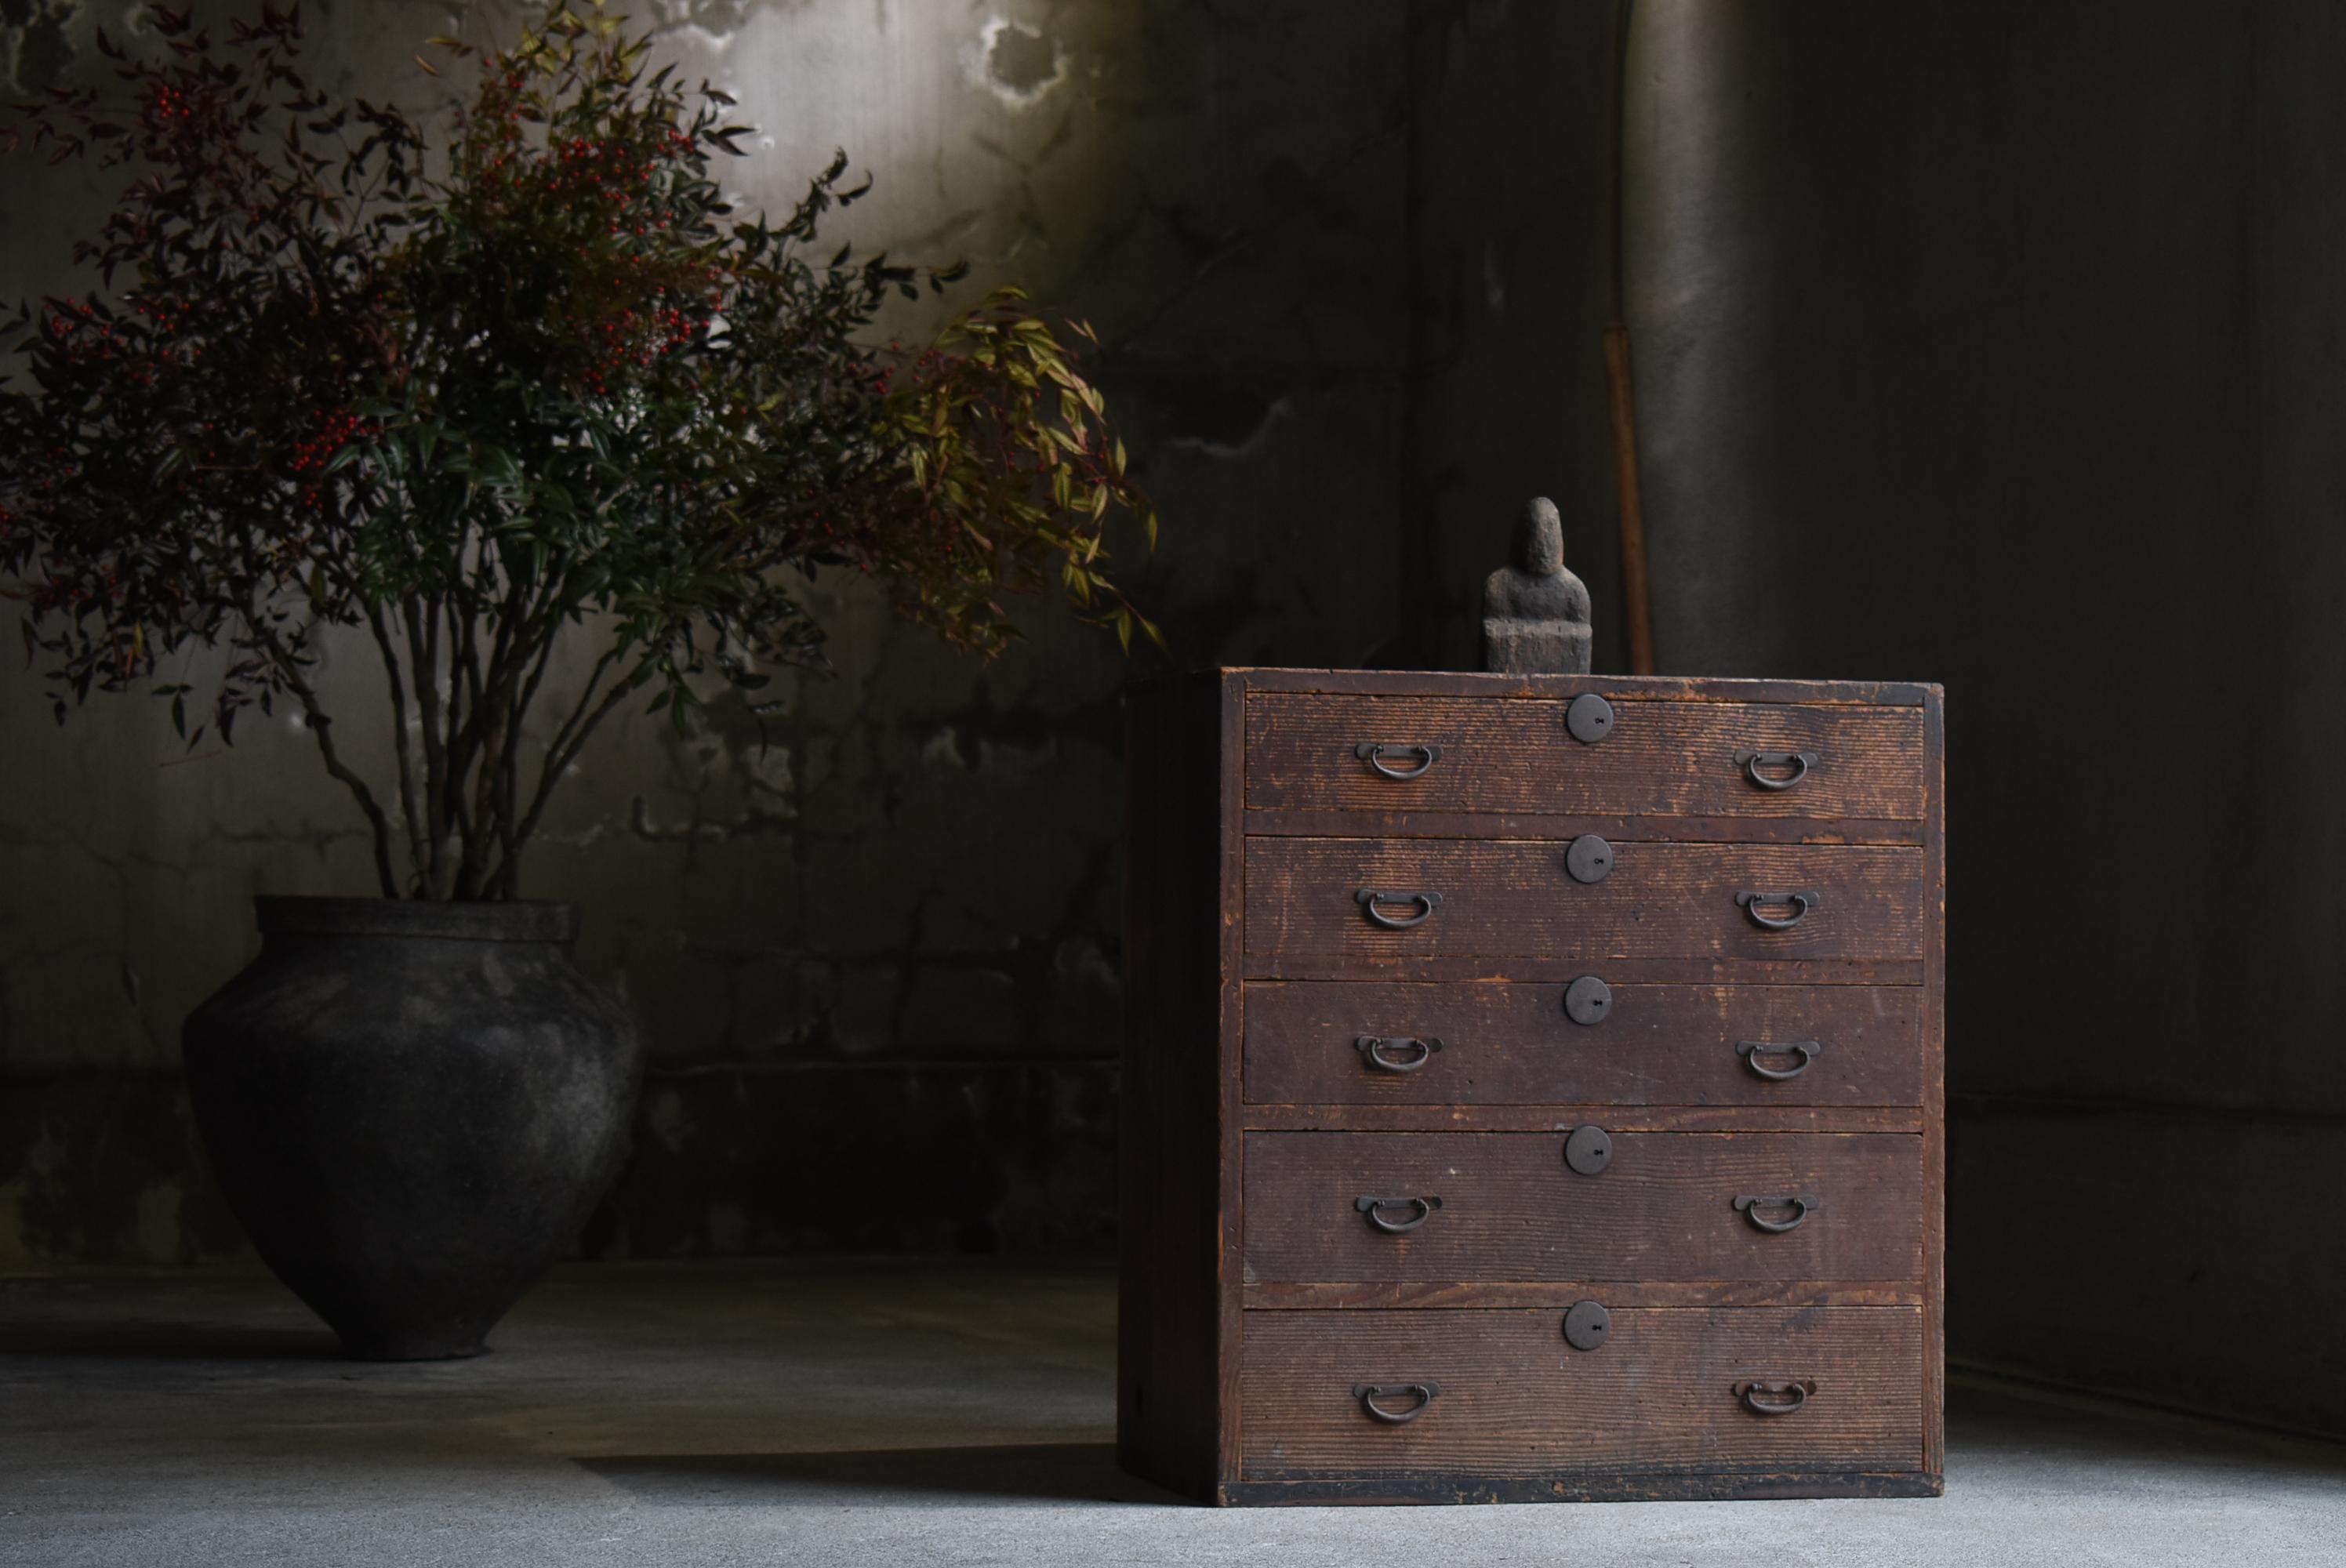 This is a very old Japanese drawer.
It is from the Meiji period (1860s-1900s).
It is made of cedar wood.
The handles are made of iron.

These drawers are rustic, simple, and beautiful.
There is no waste in the design.
It is the ultimate in